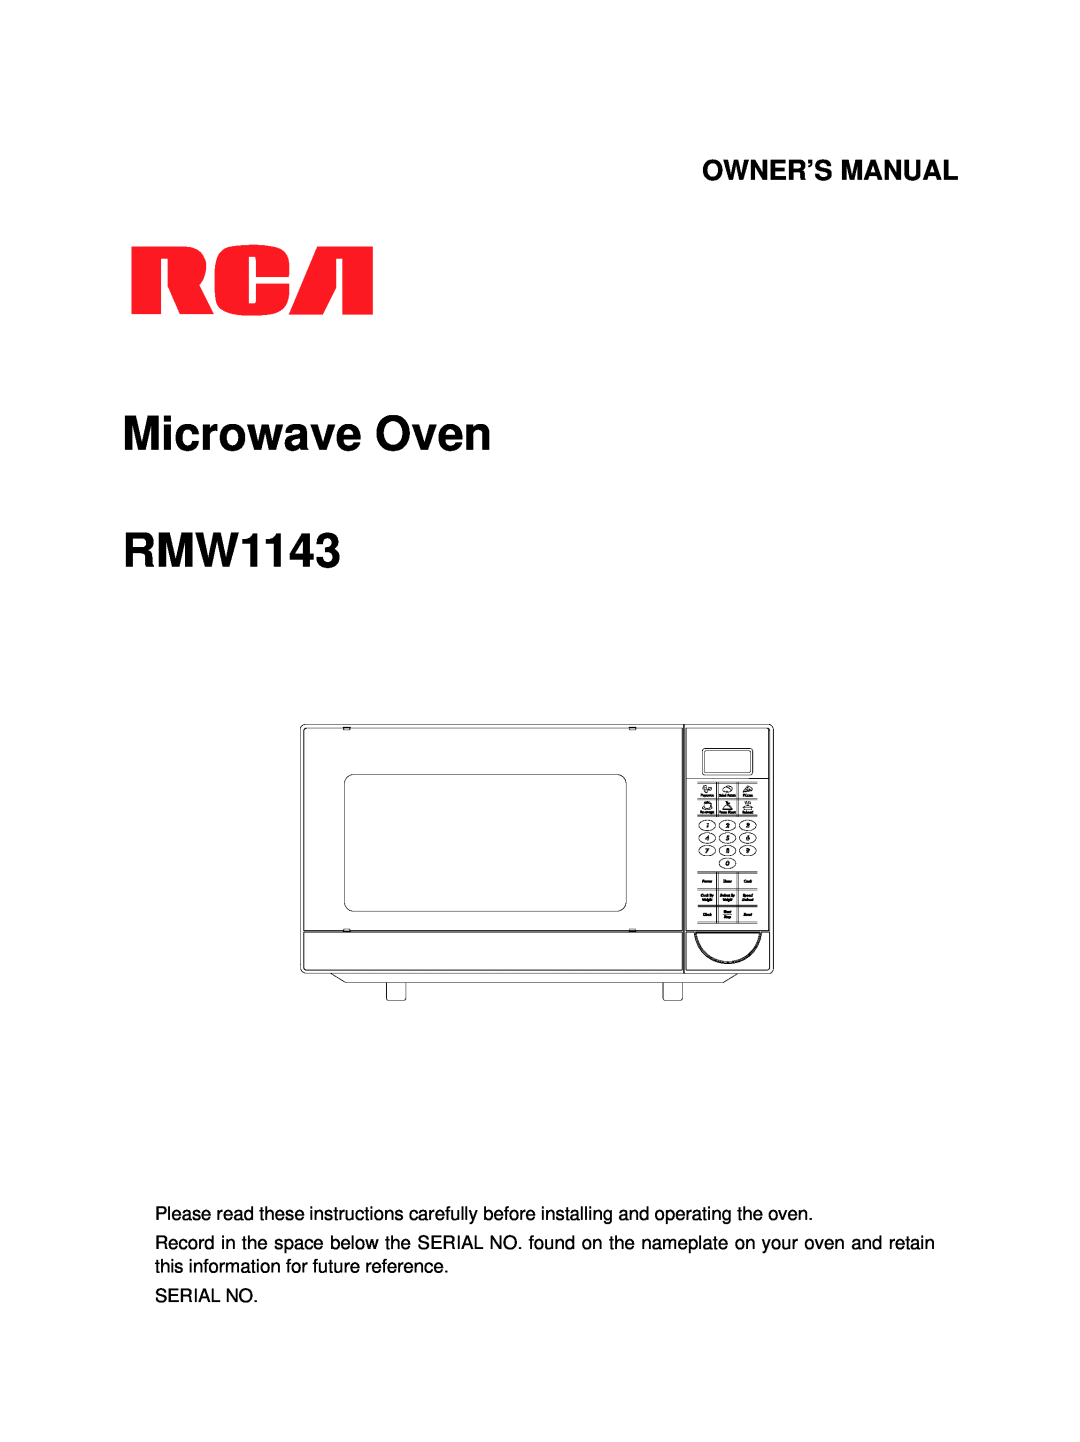 RCA owner manual Microwave Oven RMW1143 